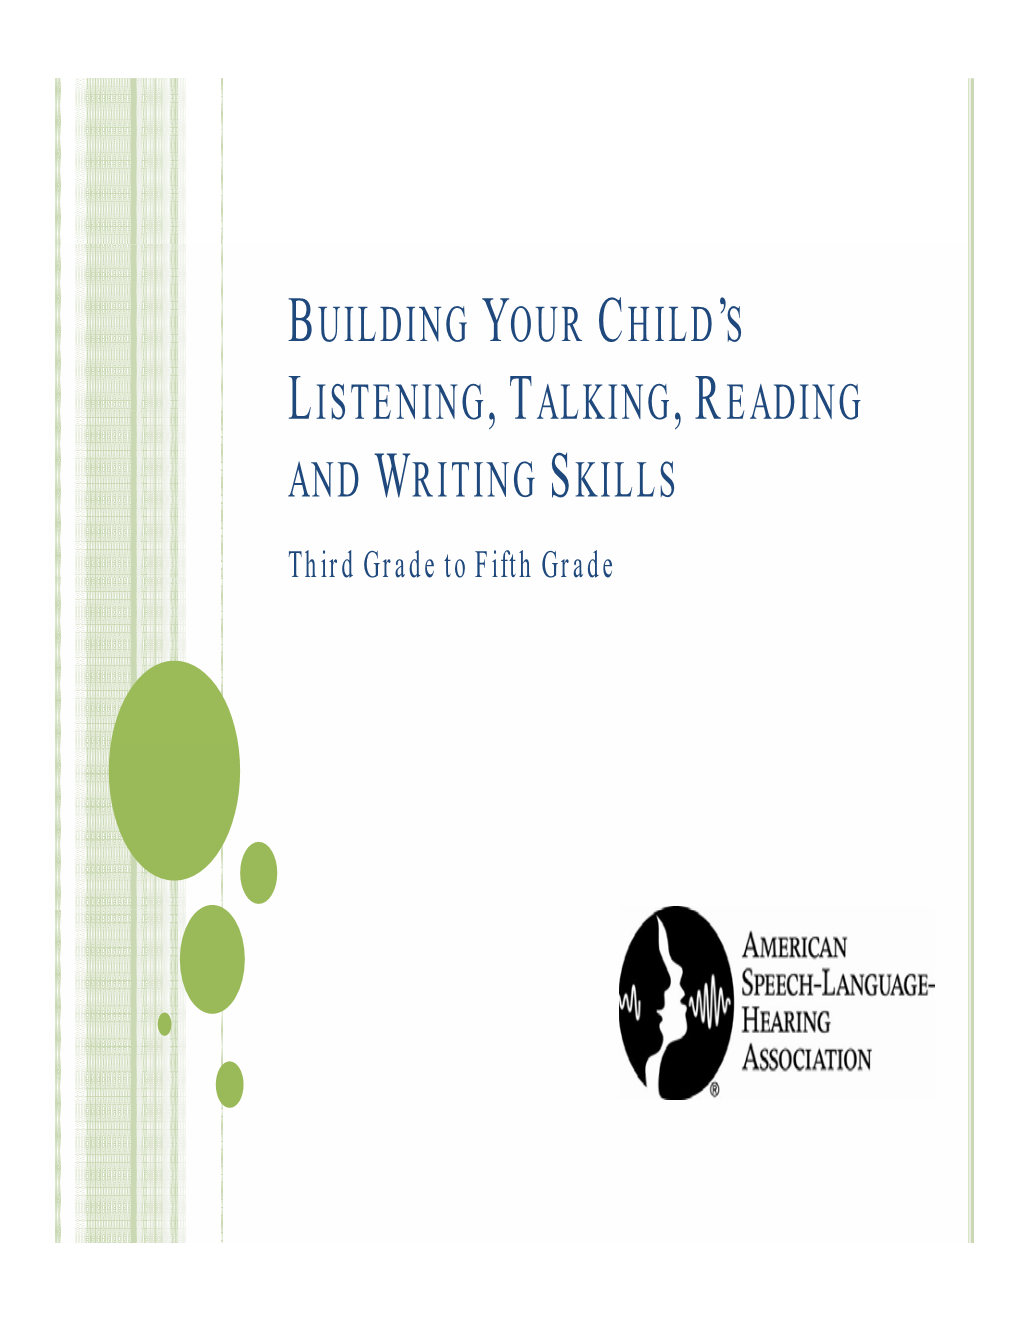 Building Your Child's Listening, Talking, Reading and Writing Skills